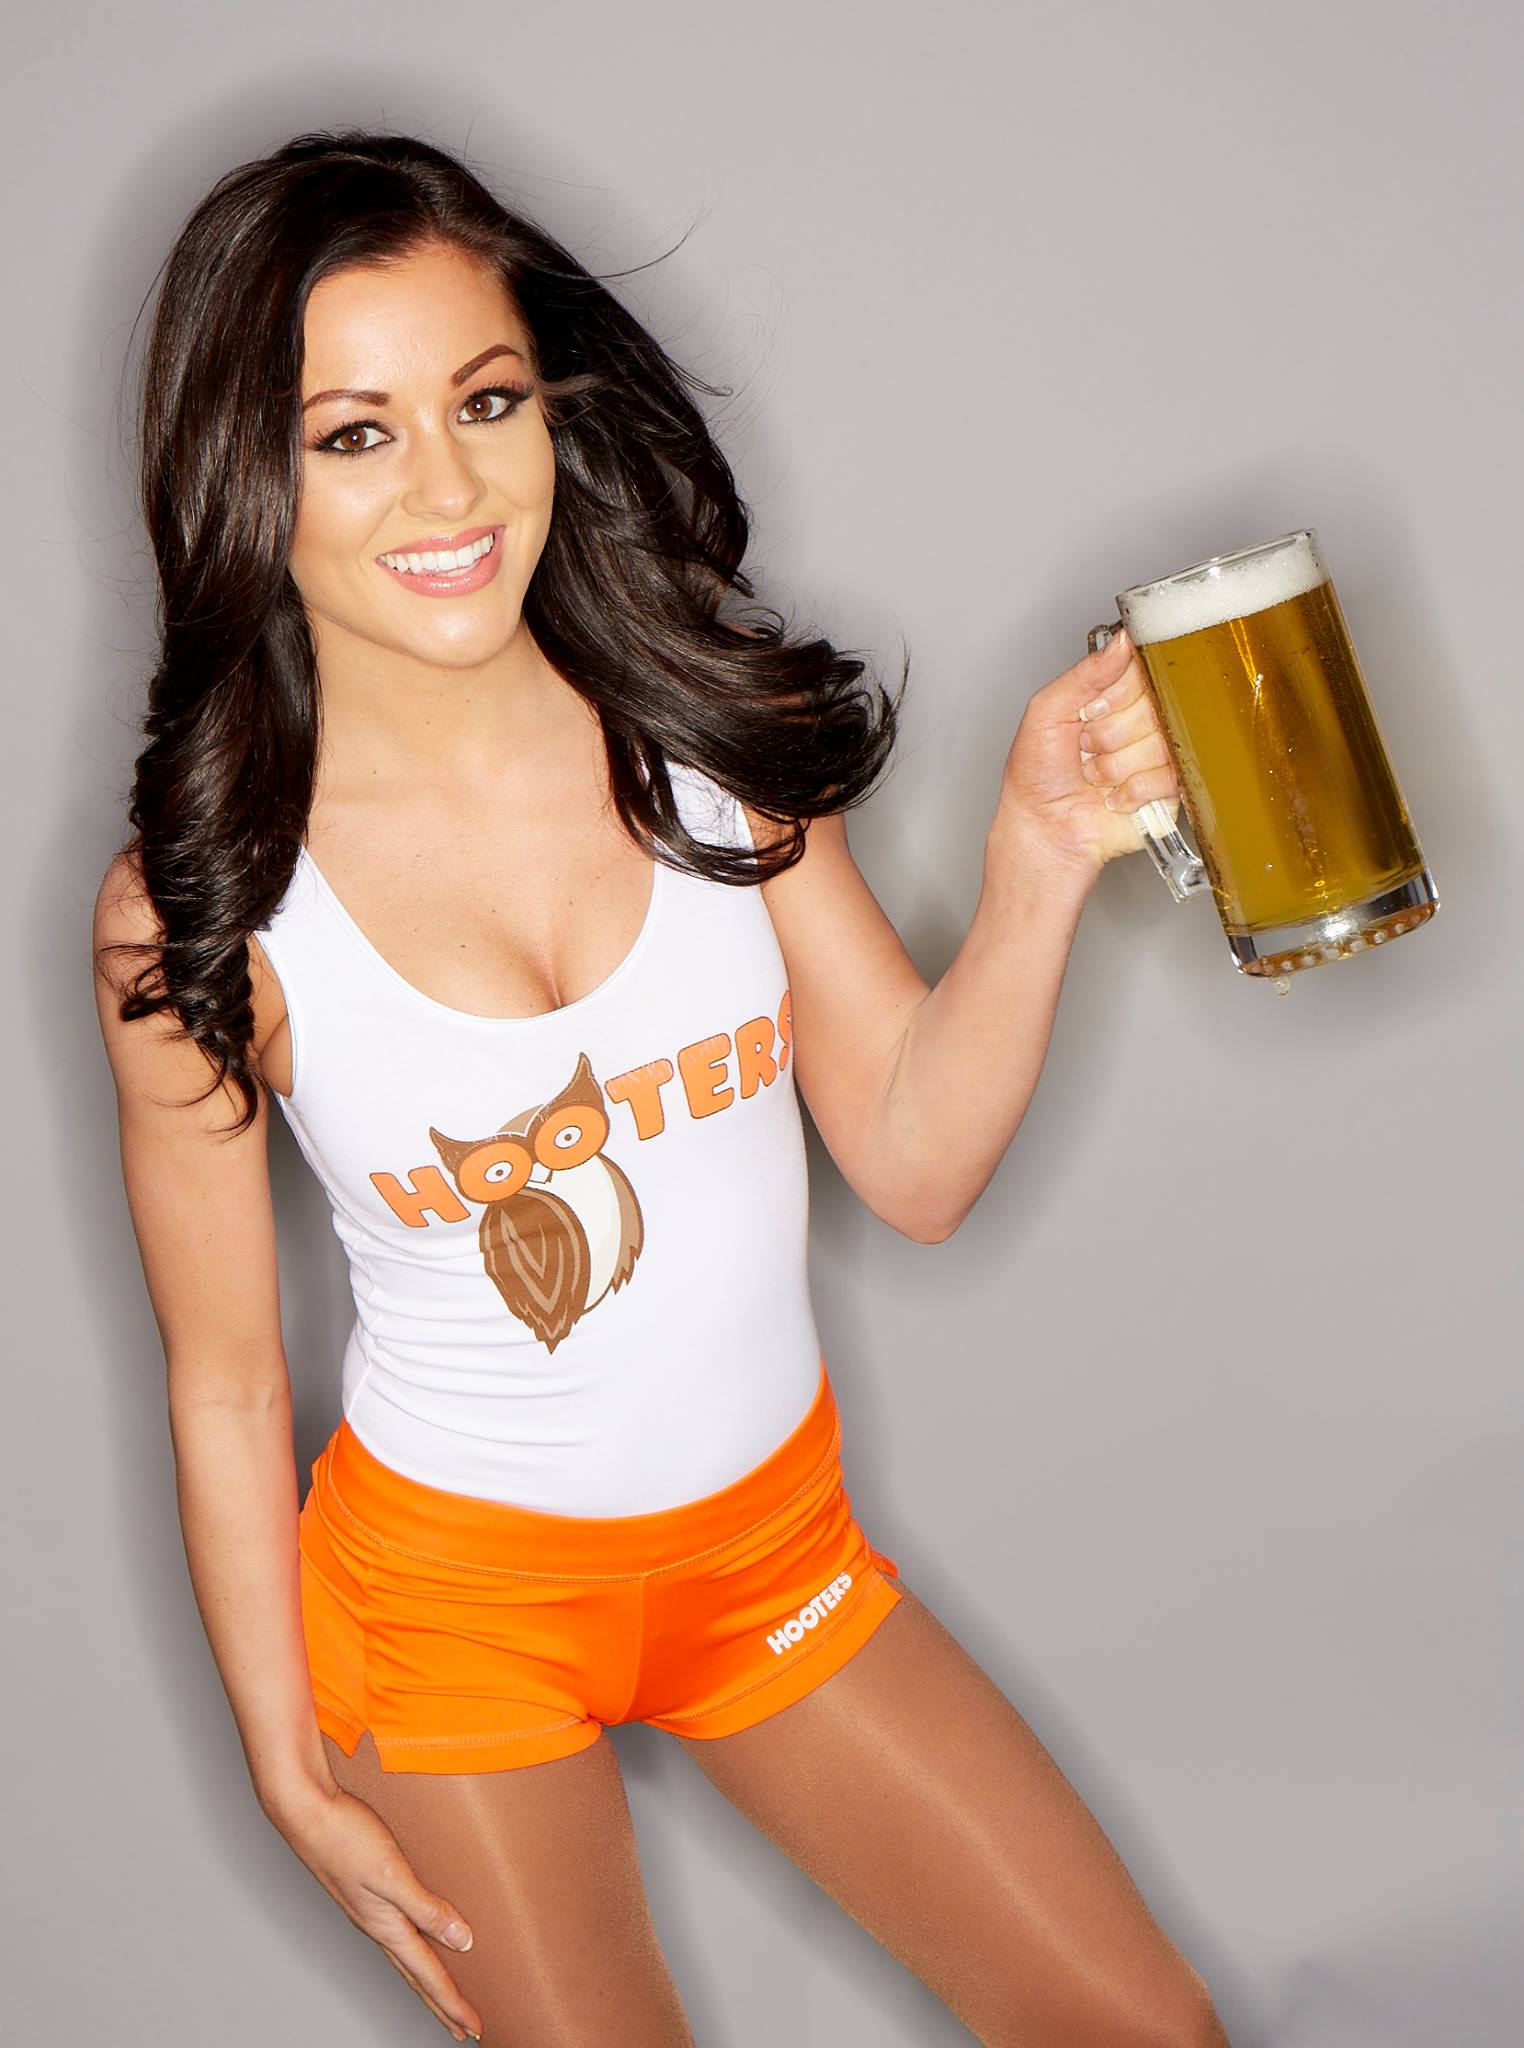 Best Hooters photos from their FB timeline (50 pics)